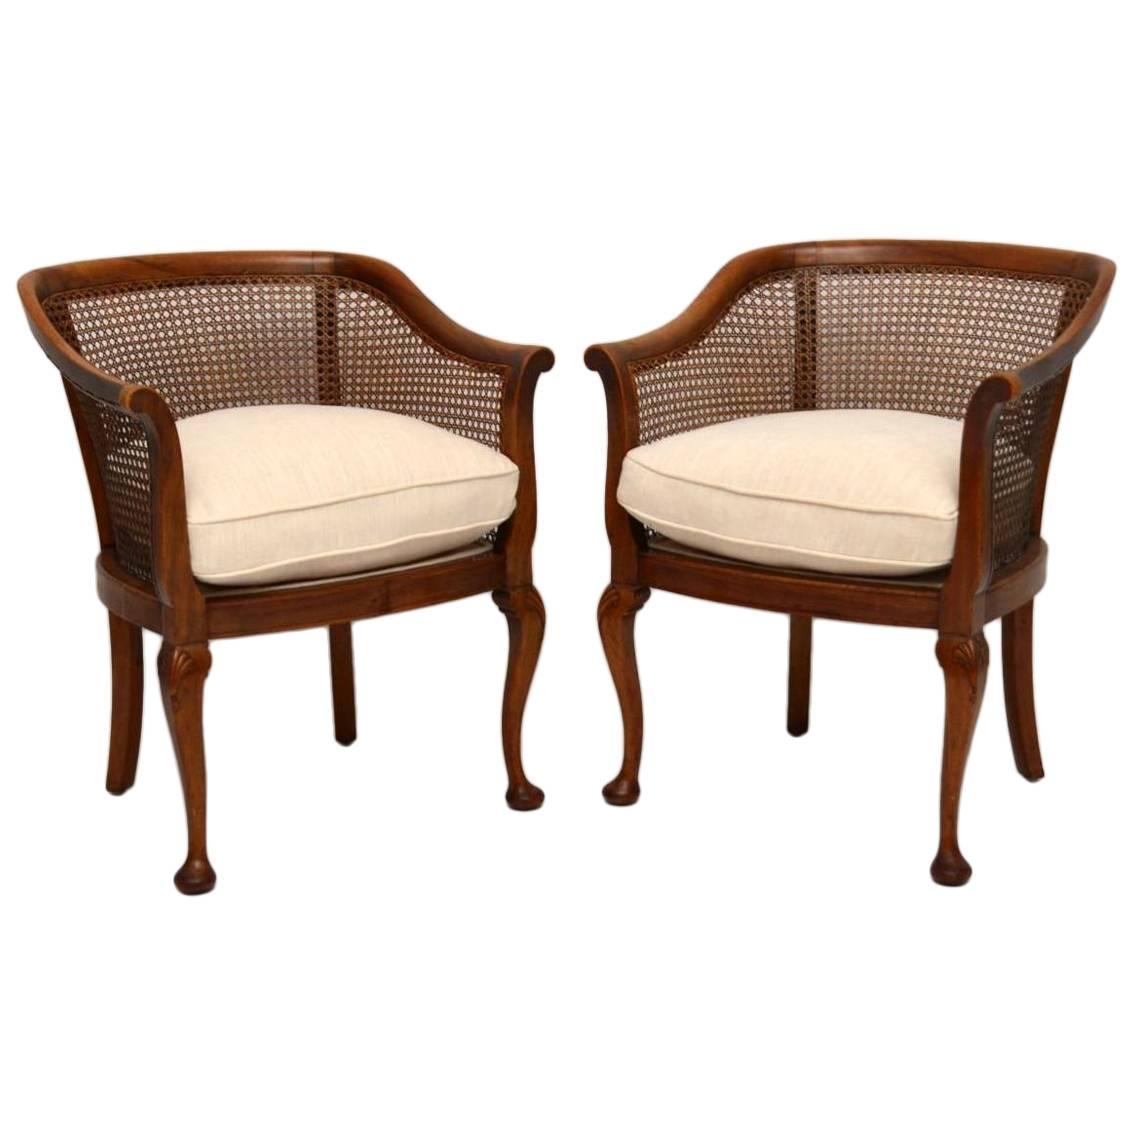 Pair of Antique Mahogany Caned Bergere Armchairs